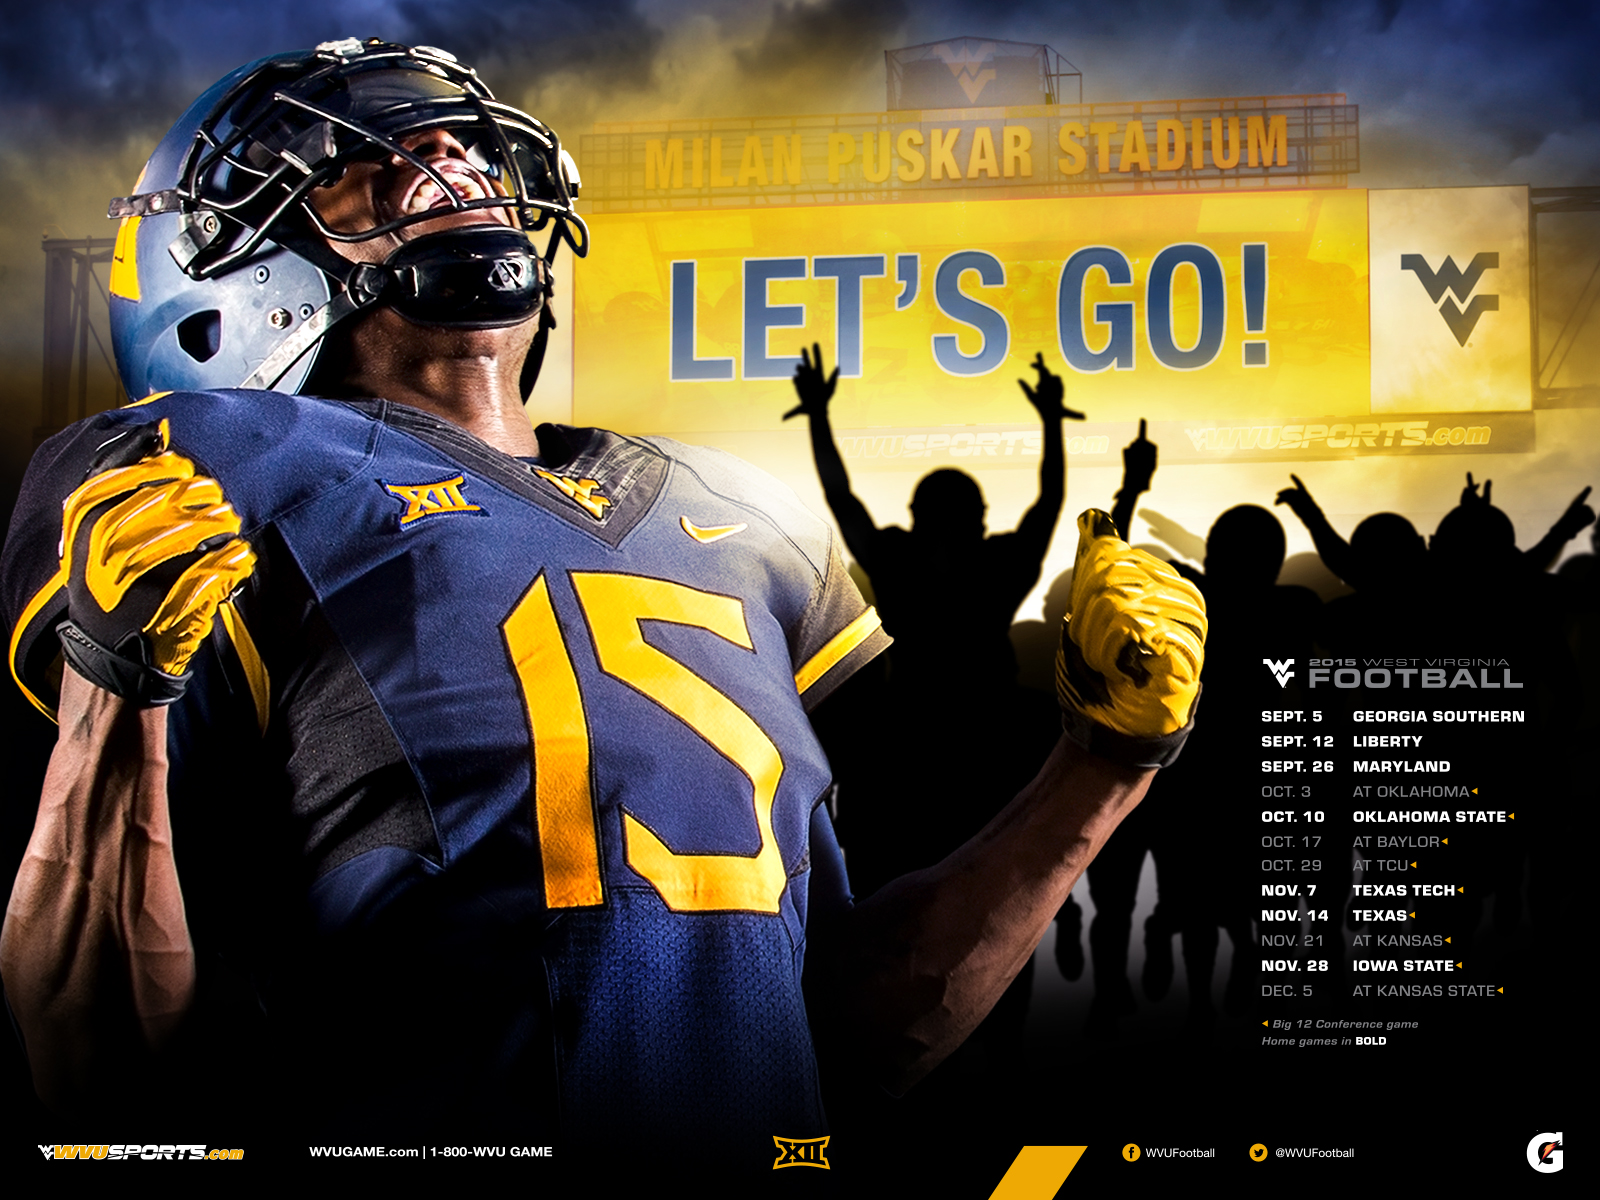 You can download a West Virginia wallpaper for you device by clicking